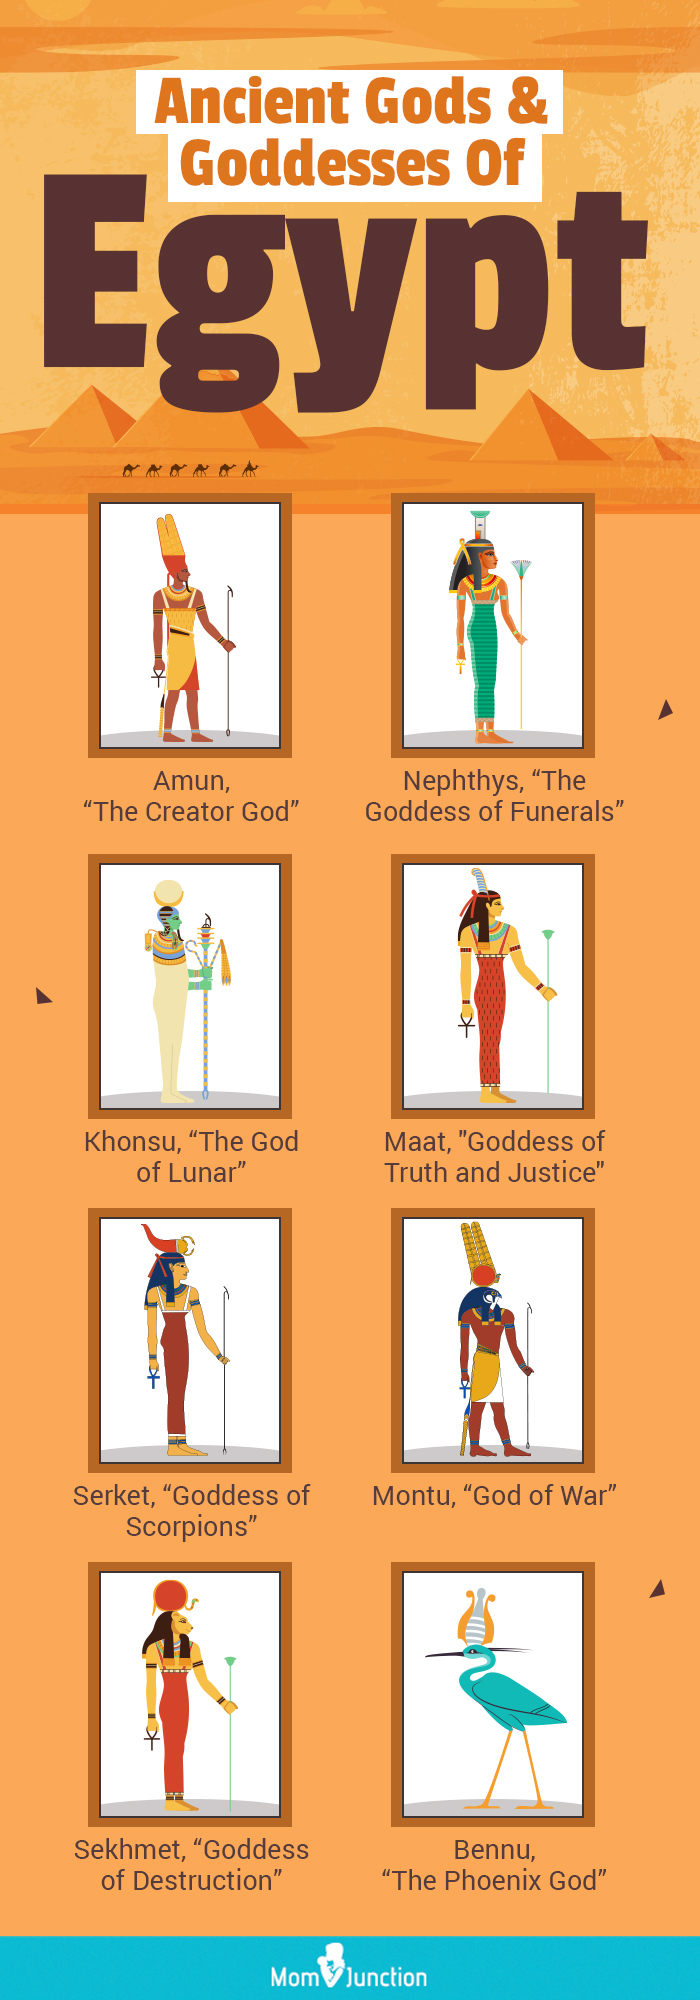 ancient gods and goddesses of egypt (infographic)